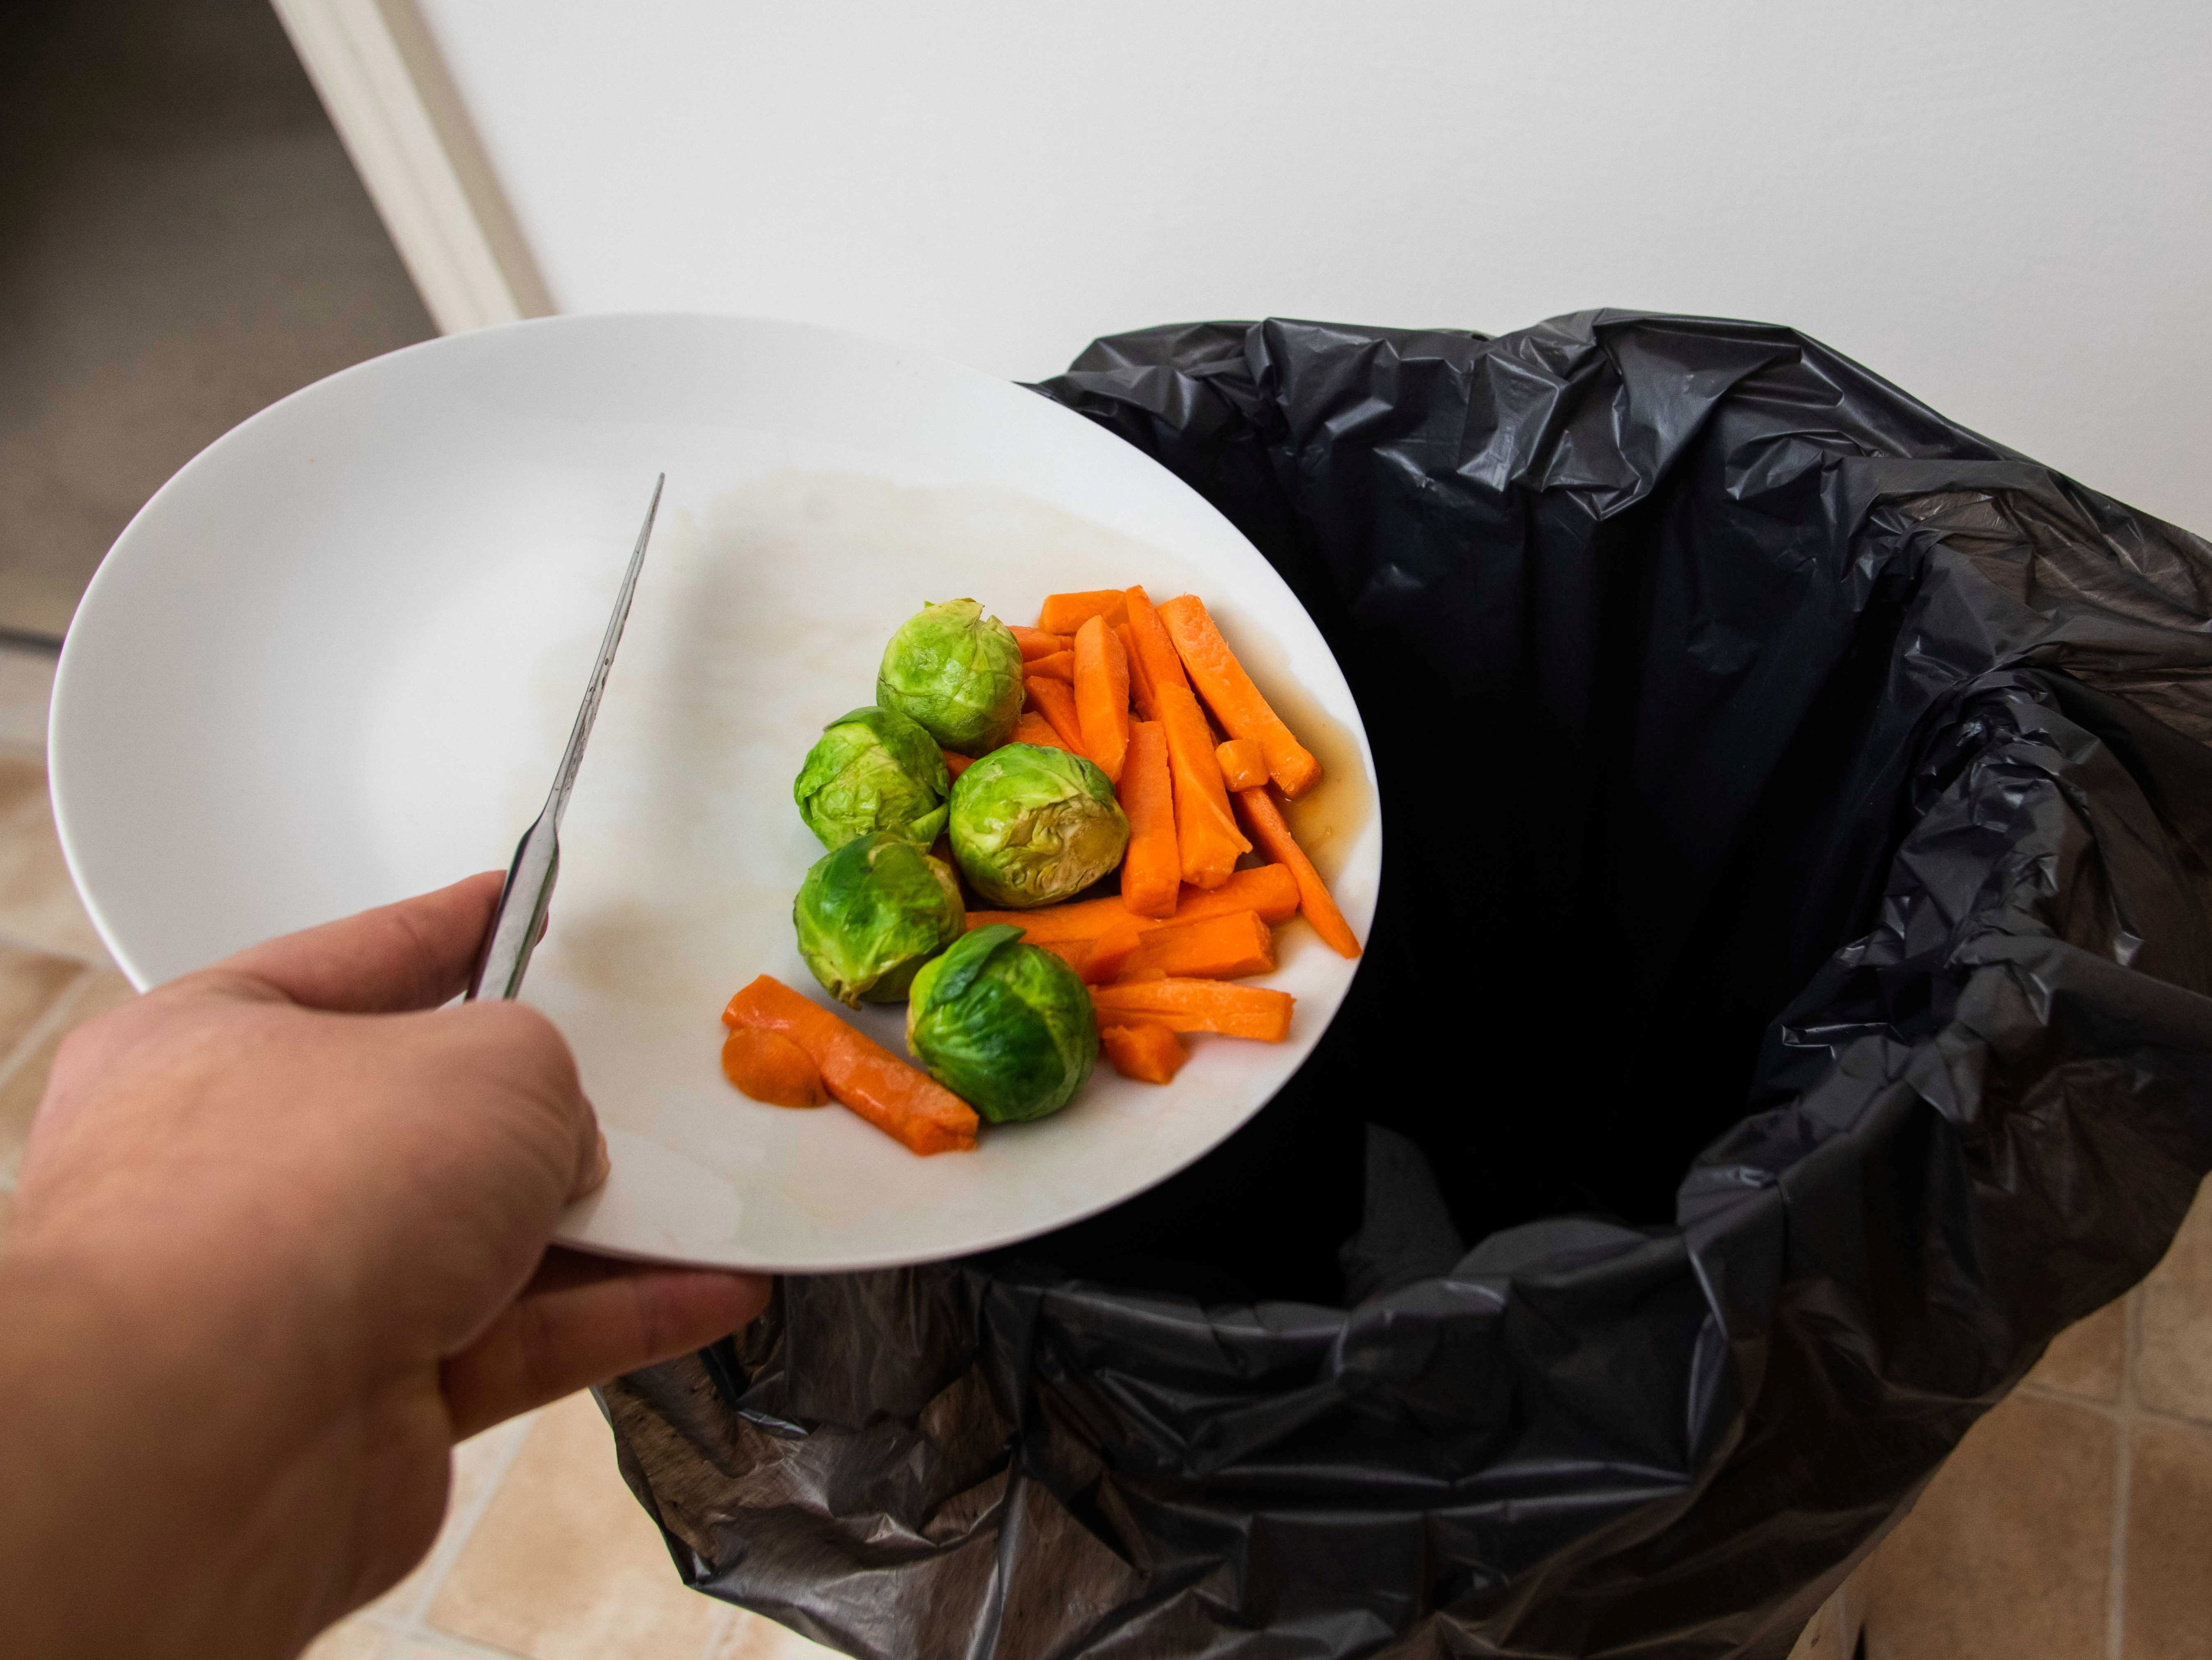 Nearly one-third of people admit wasting more food than usual over Christmas